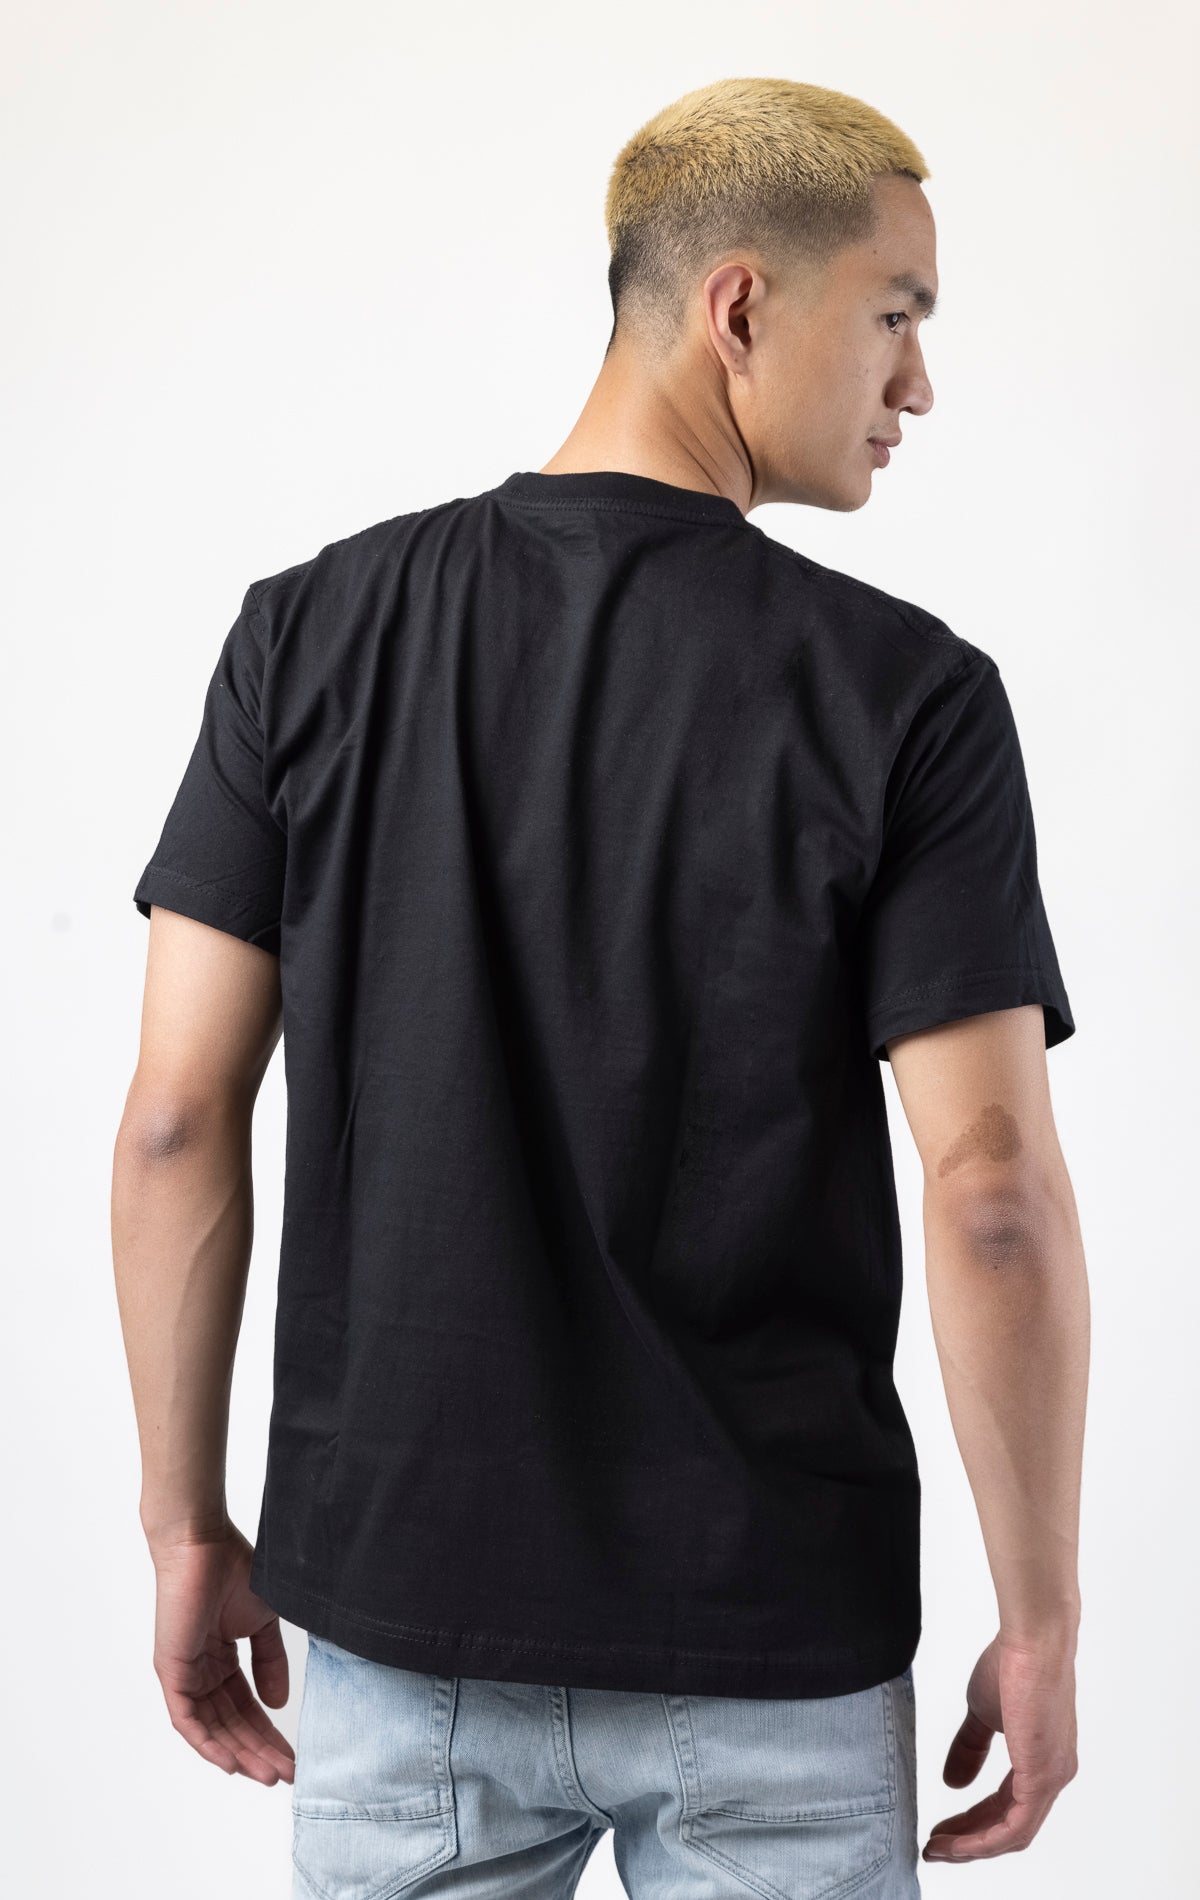 Oversized T-shirt with ribbed crew neck and Friends logo printed design on the front.